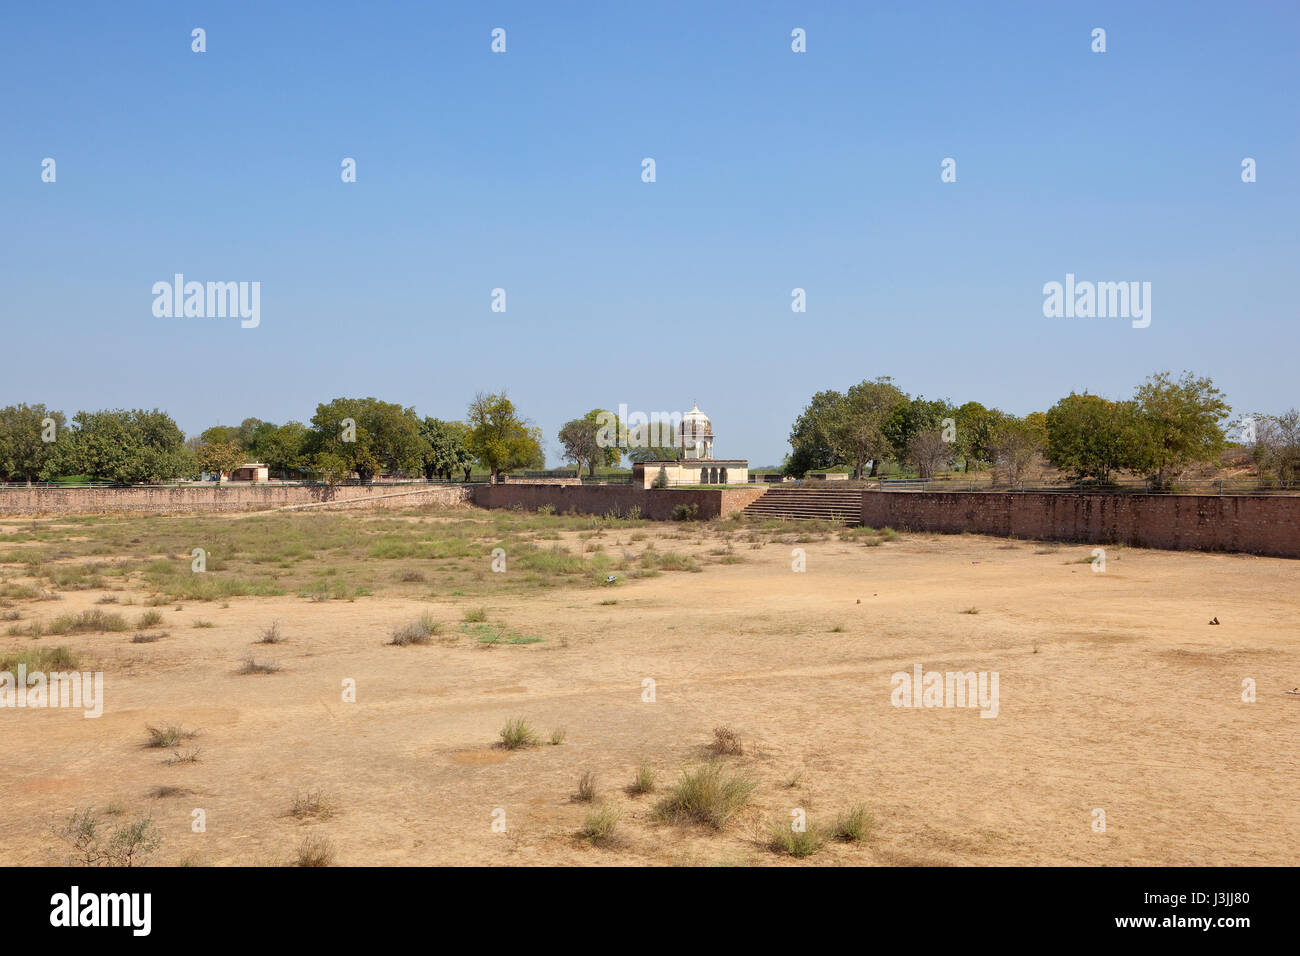 a dry sandy sarovar at the historical place of jal mahal in north india under a blue sky Stock Photo